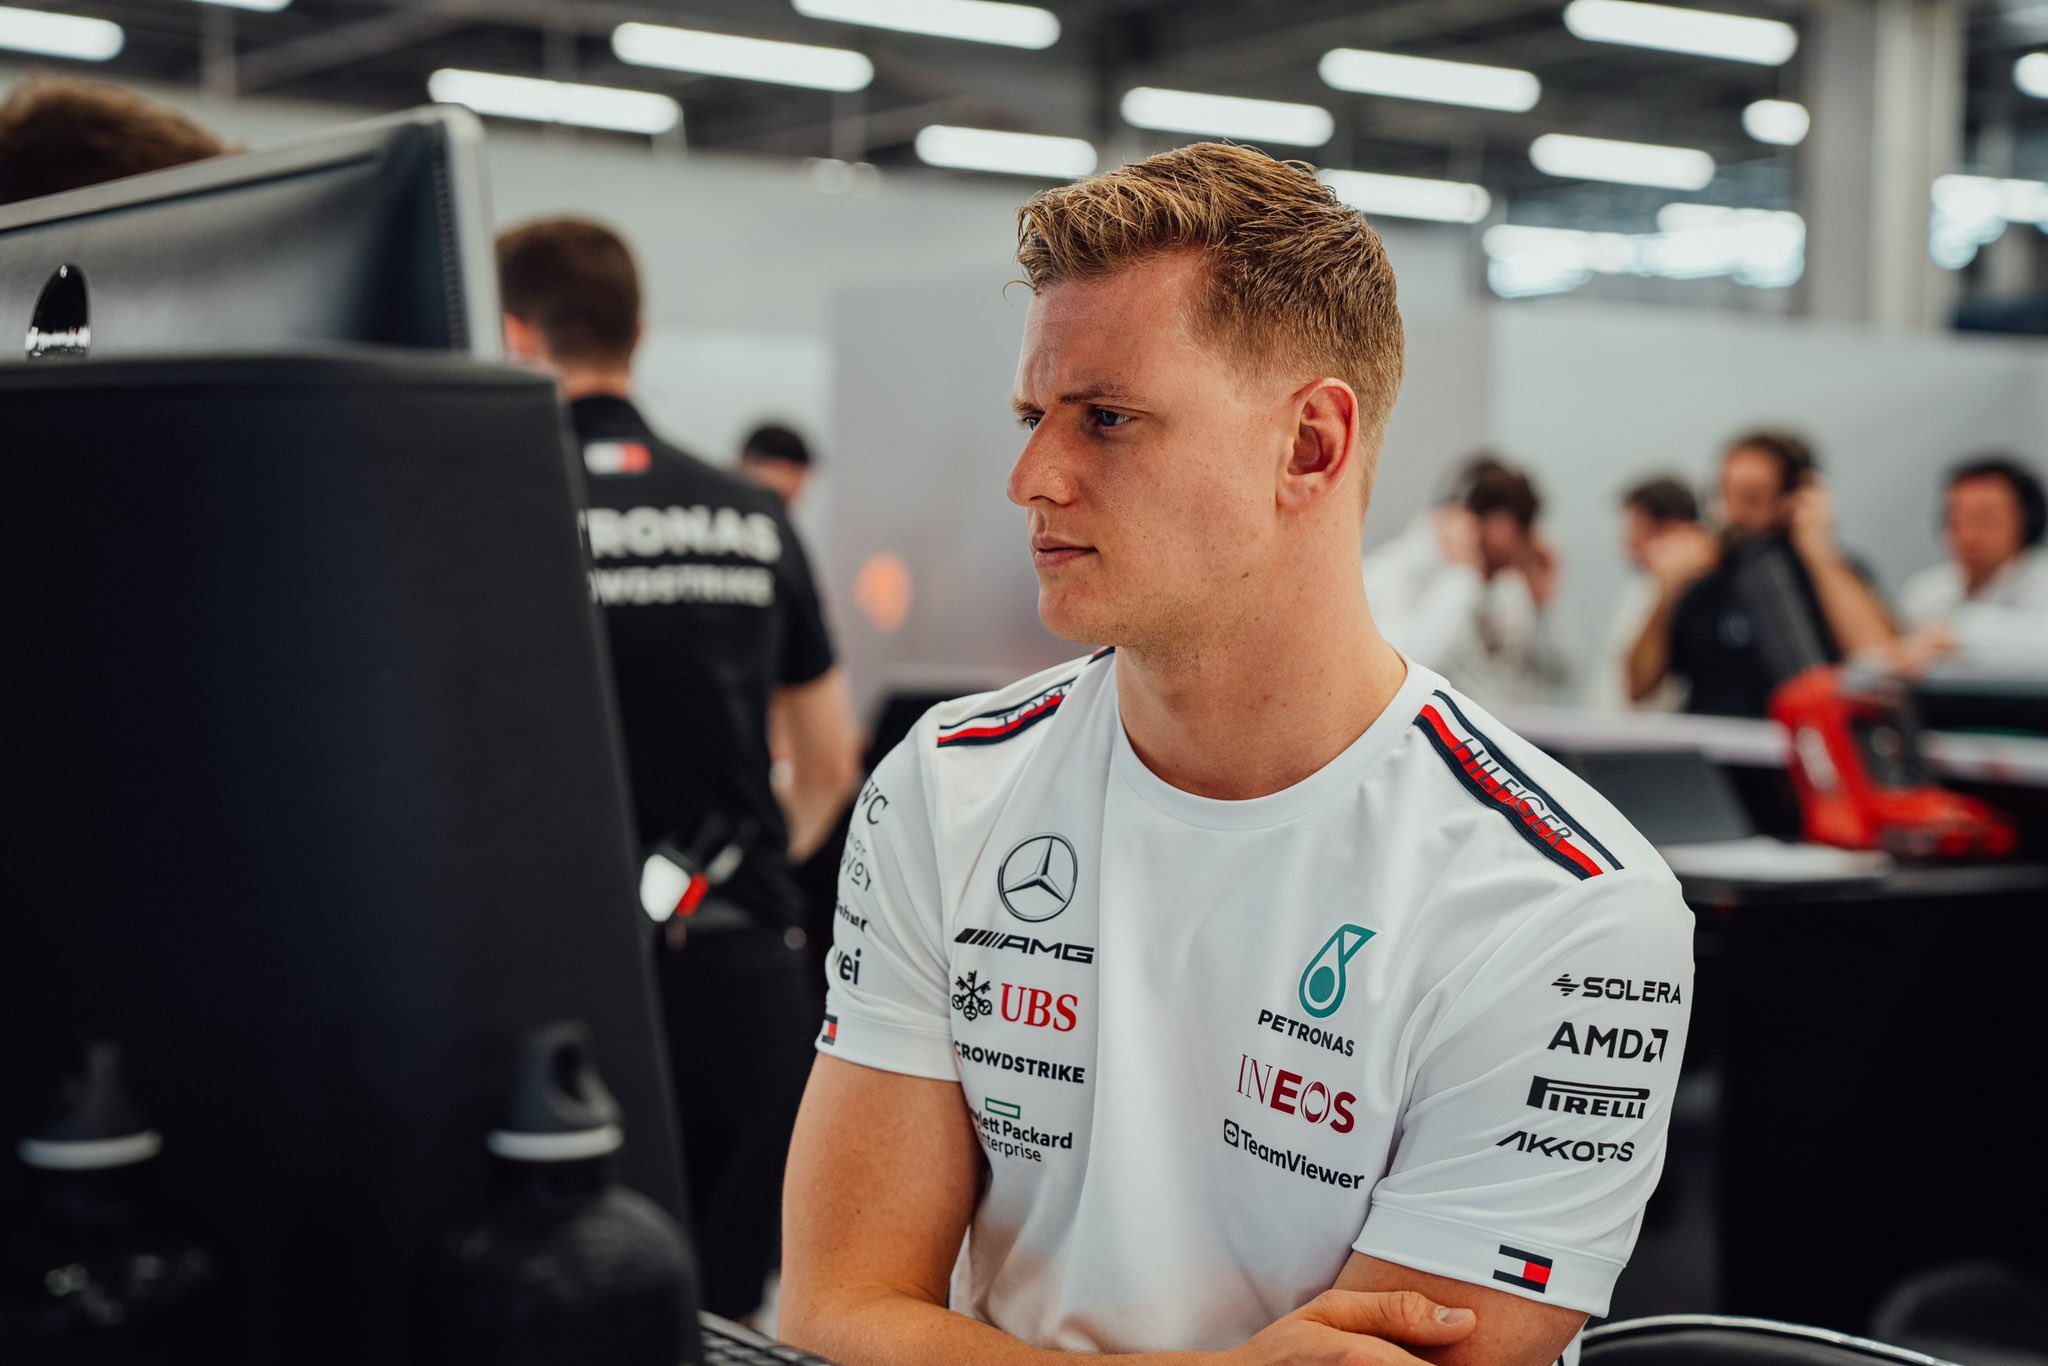 Mick Schumacher has completed two years as a full-time Formula One driver, but sits this year out as the Mercedes reserve driver